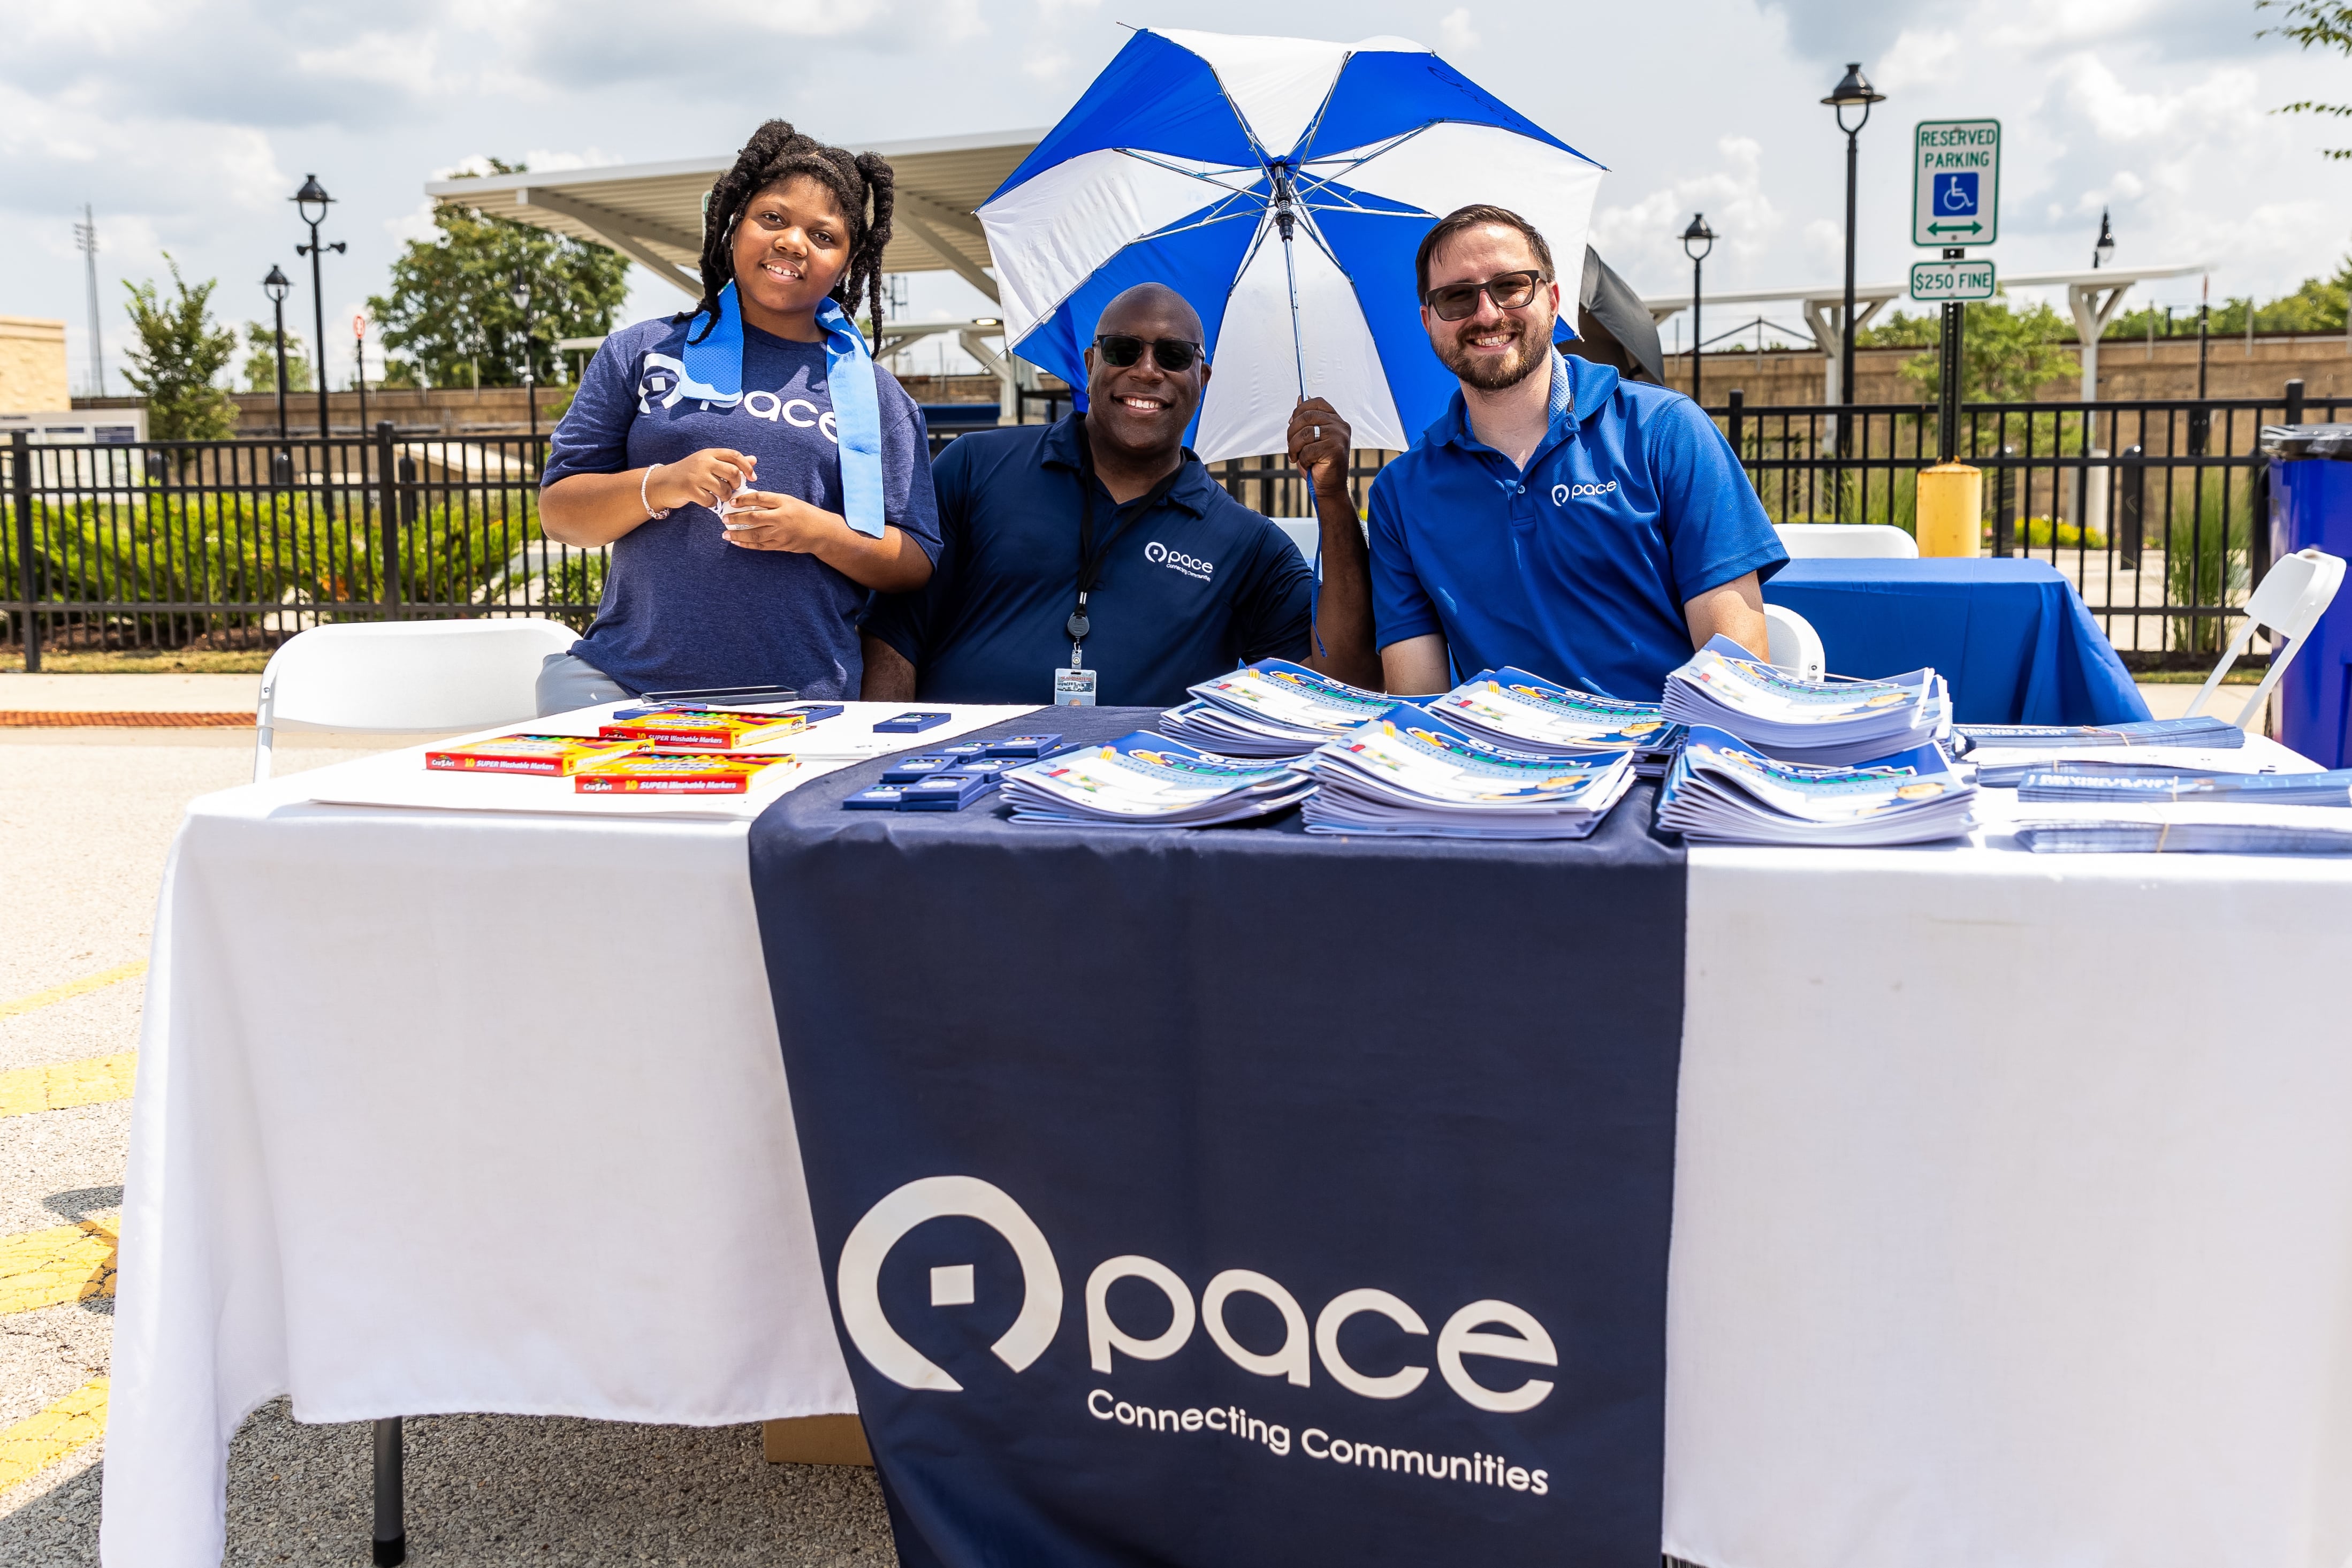 Pace connects with community with Activate Joliet event